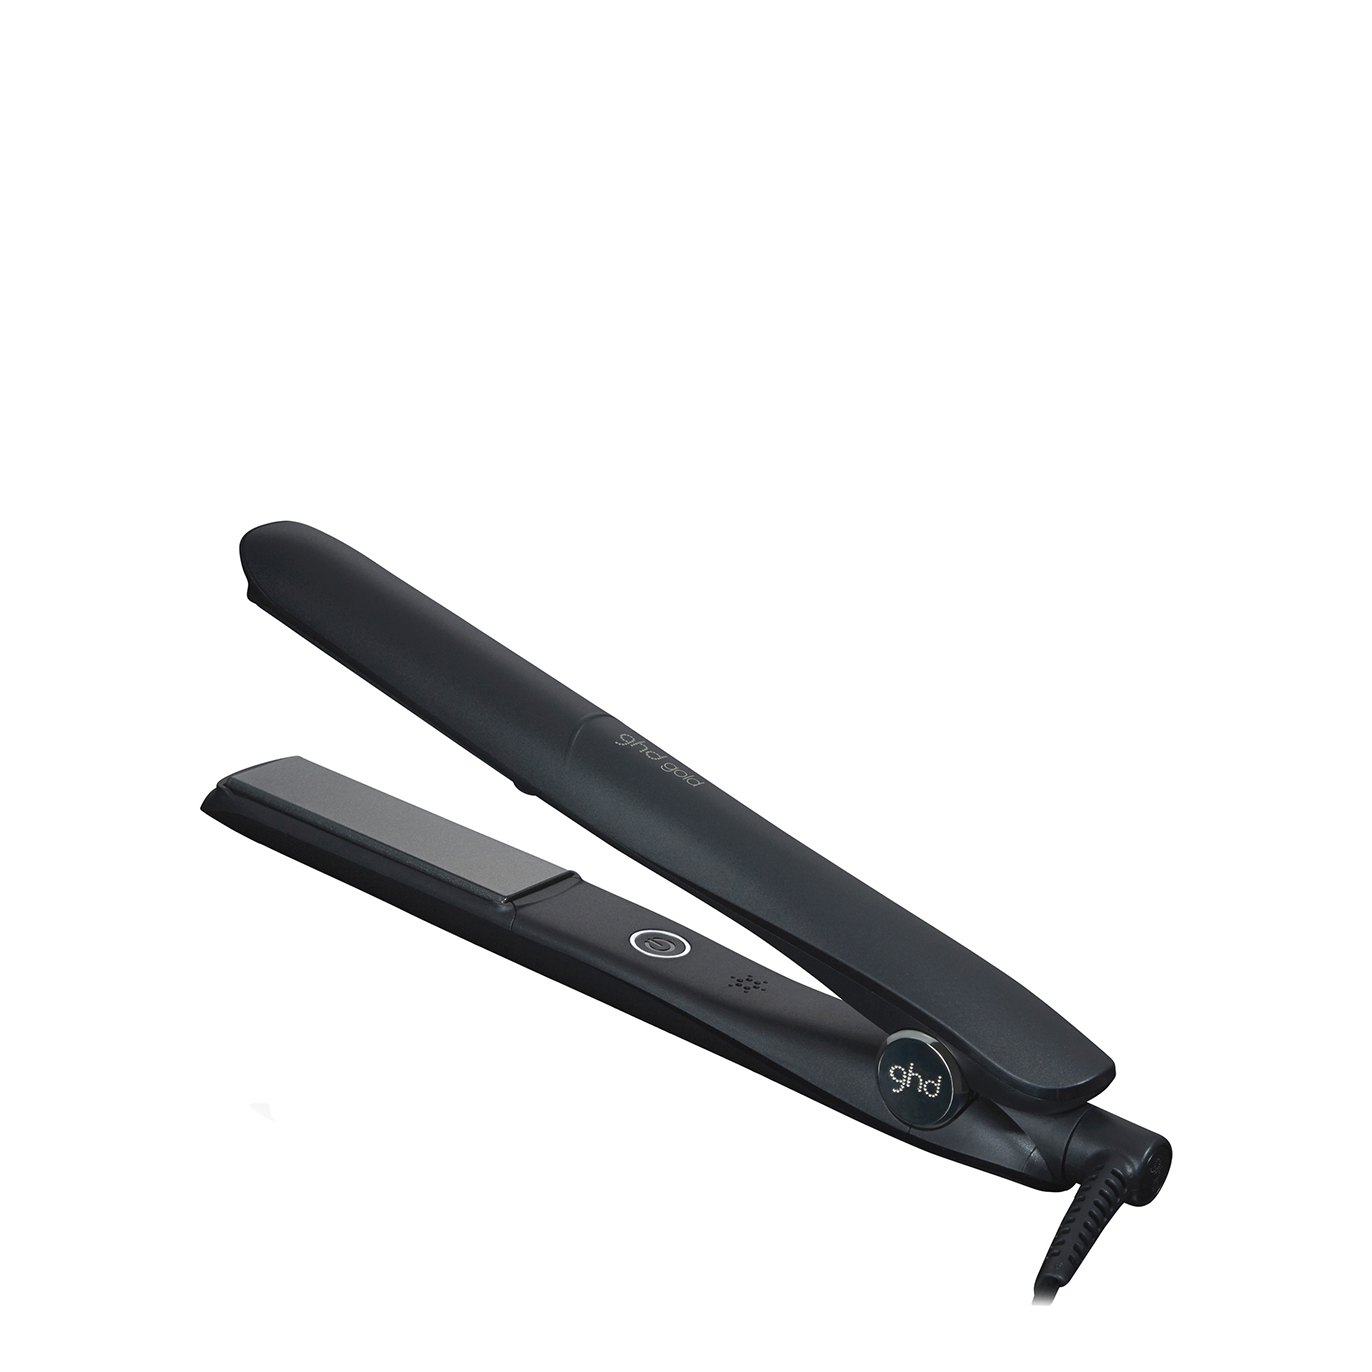 Ghd Gold Professional Styler